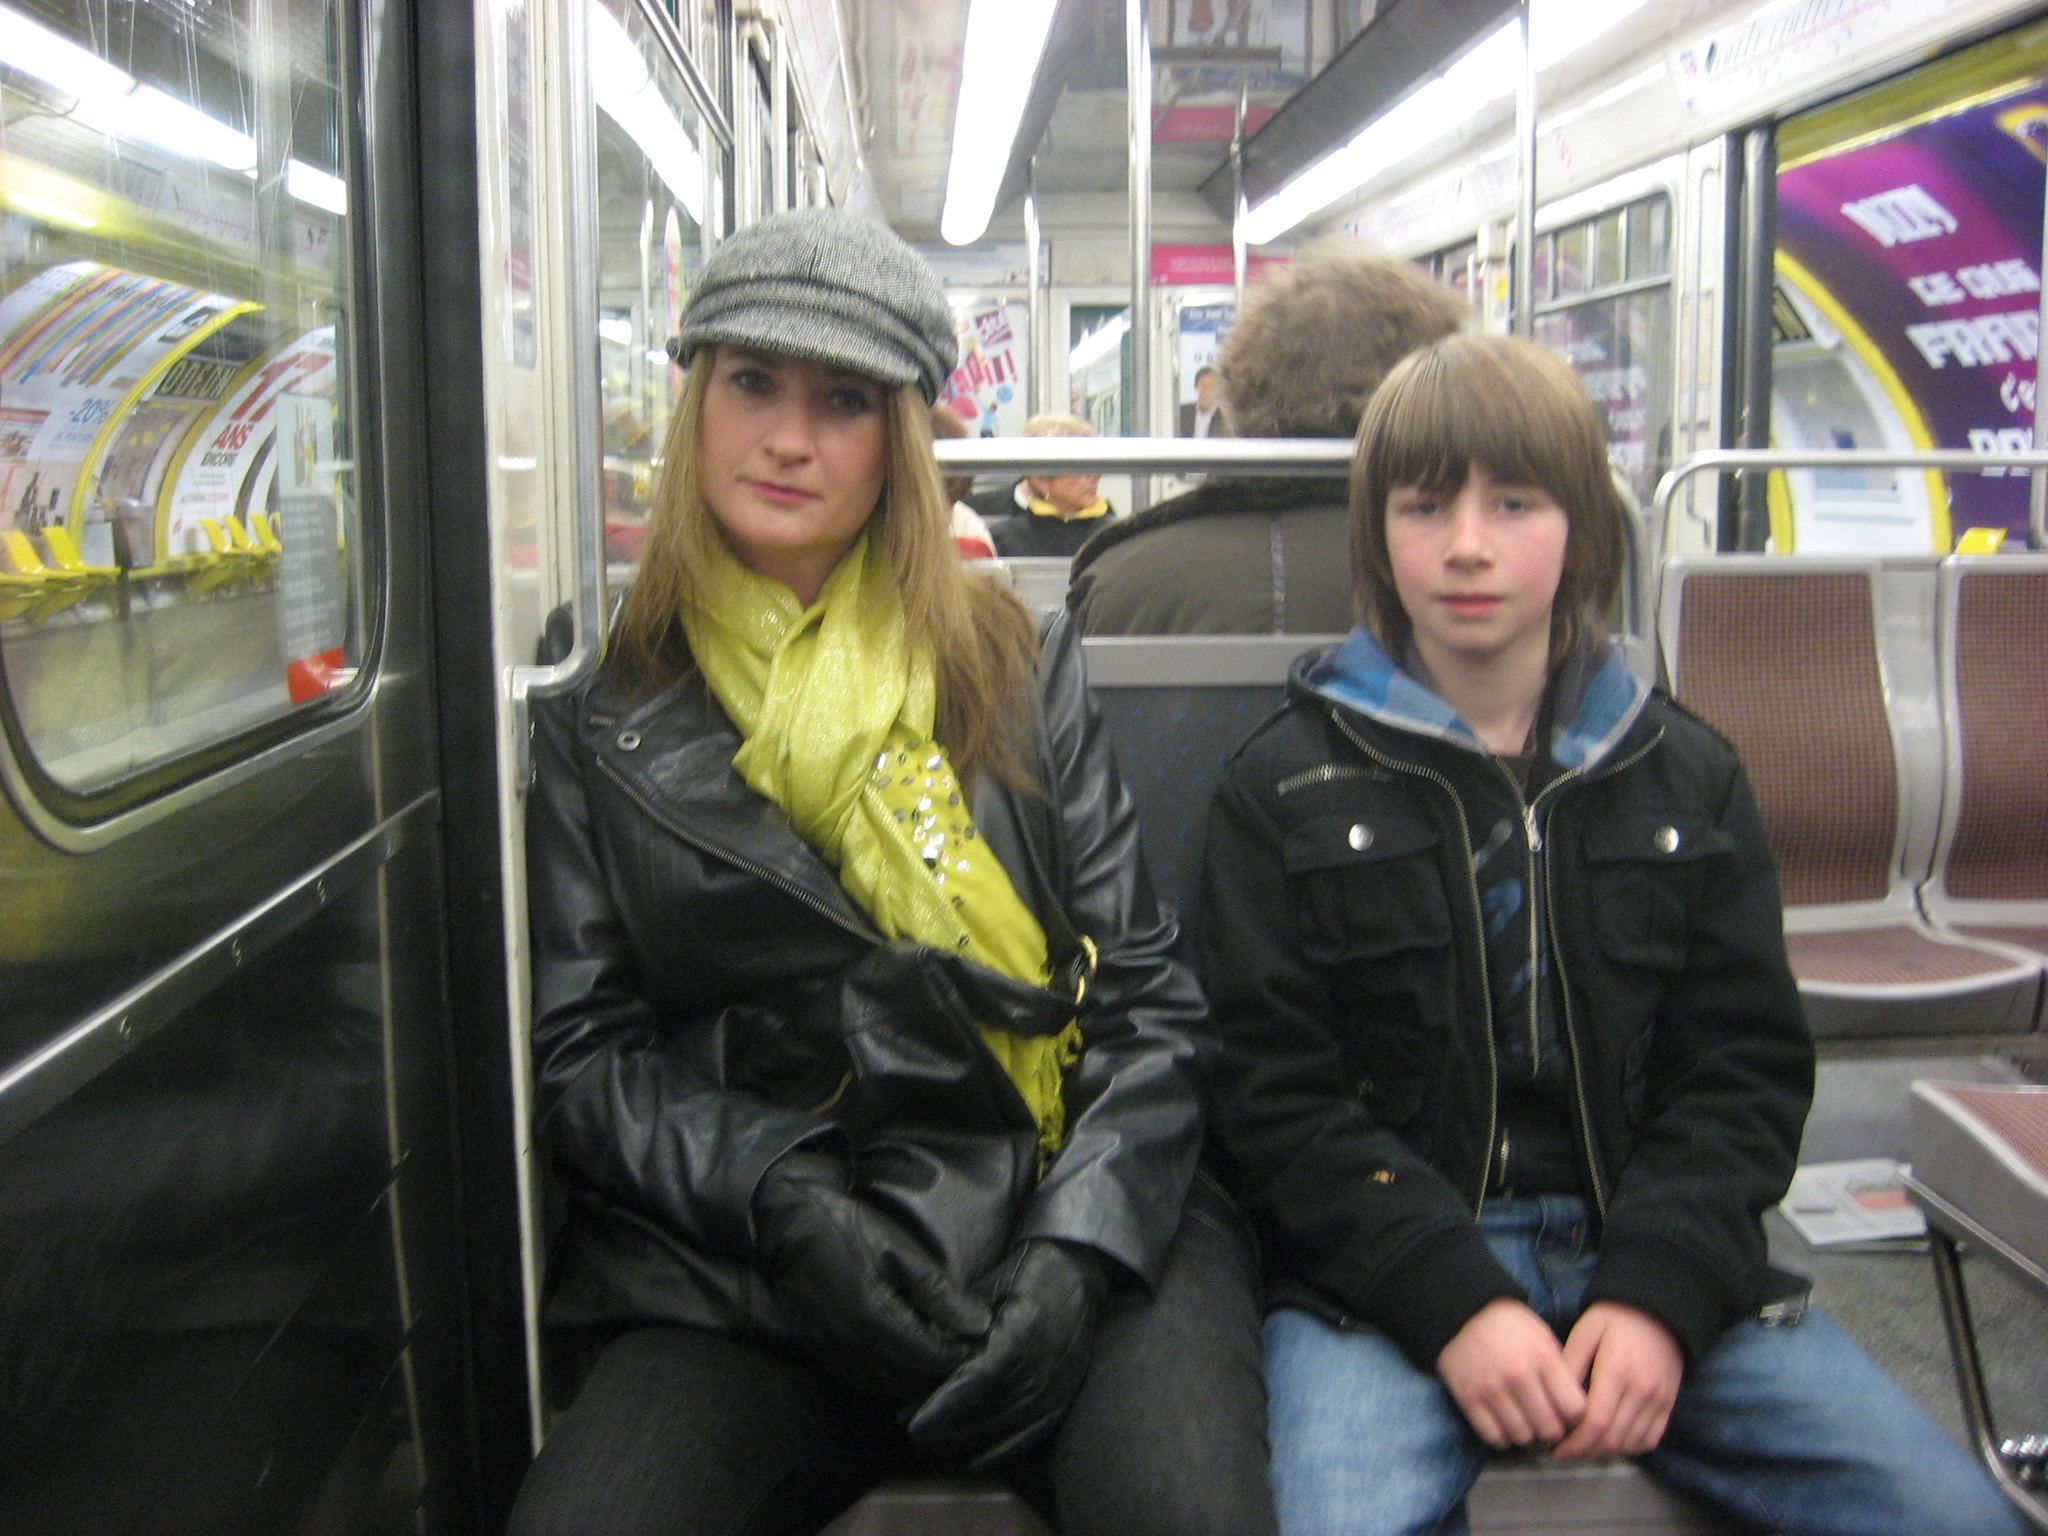 A woman and her son in a subway | Source: Flickr